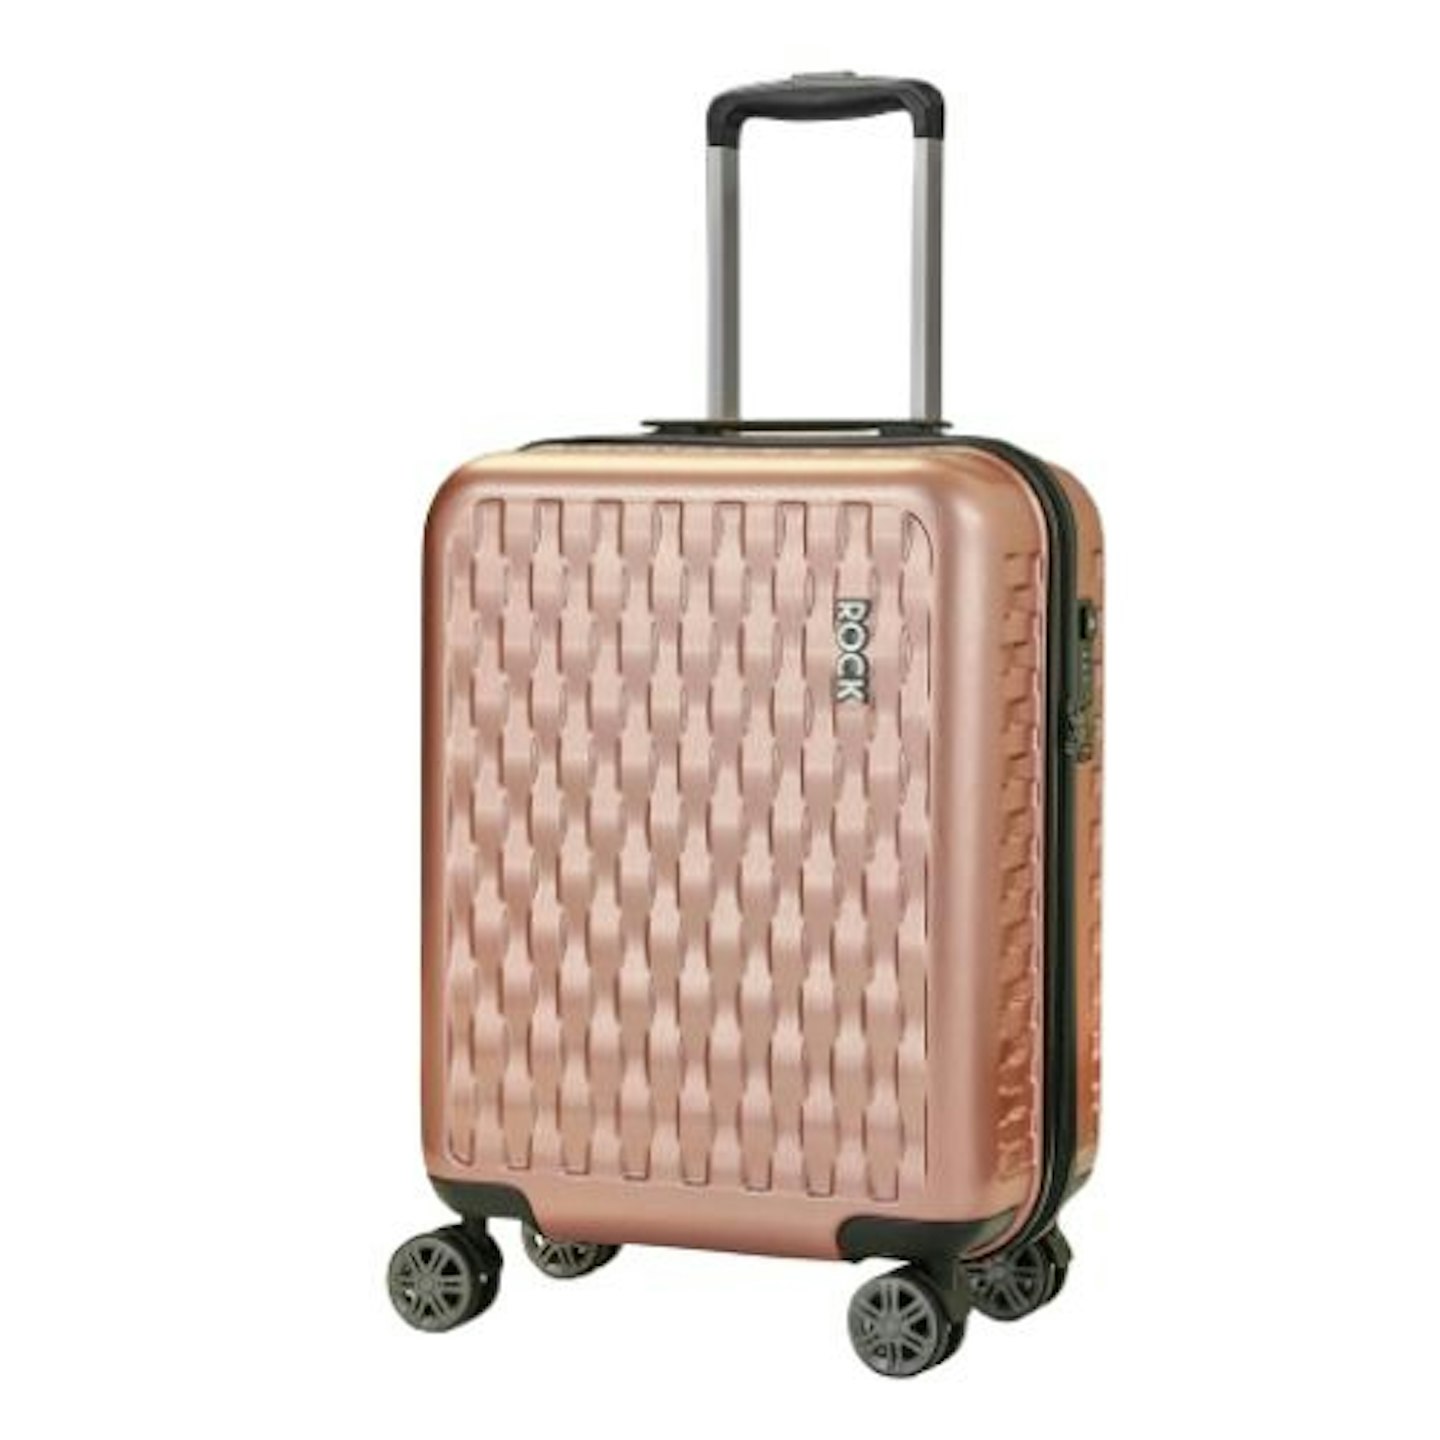 Rock Luggage Allure Carry-On 8-Wheel Suitcase